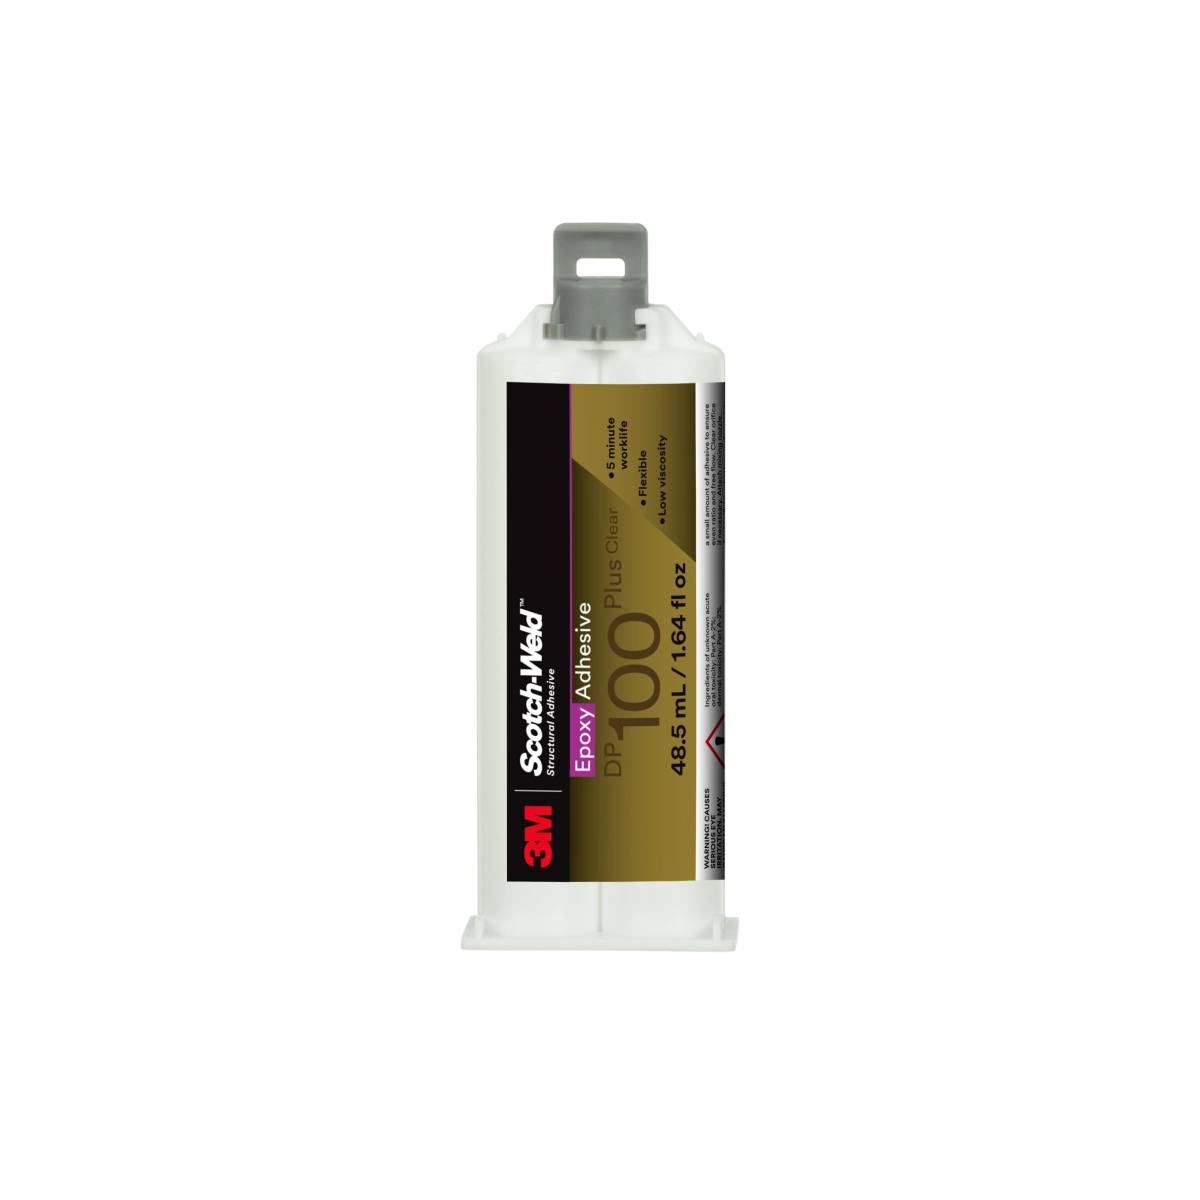 3M Scotch-Weld Epoxy Resin Base DP 100 Plus, Component A , 1 drum = 5 gallons = 18.9271 liters